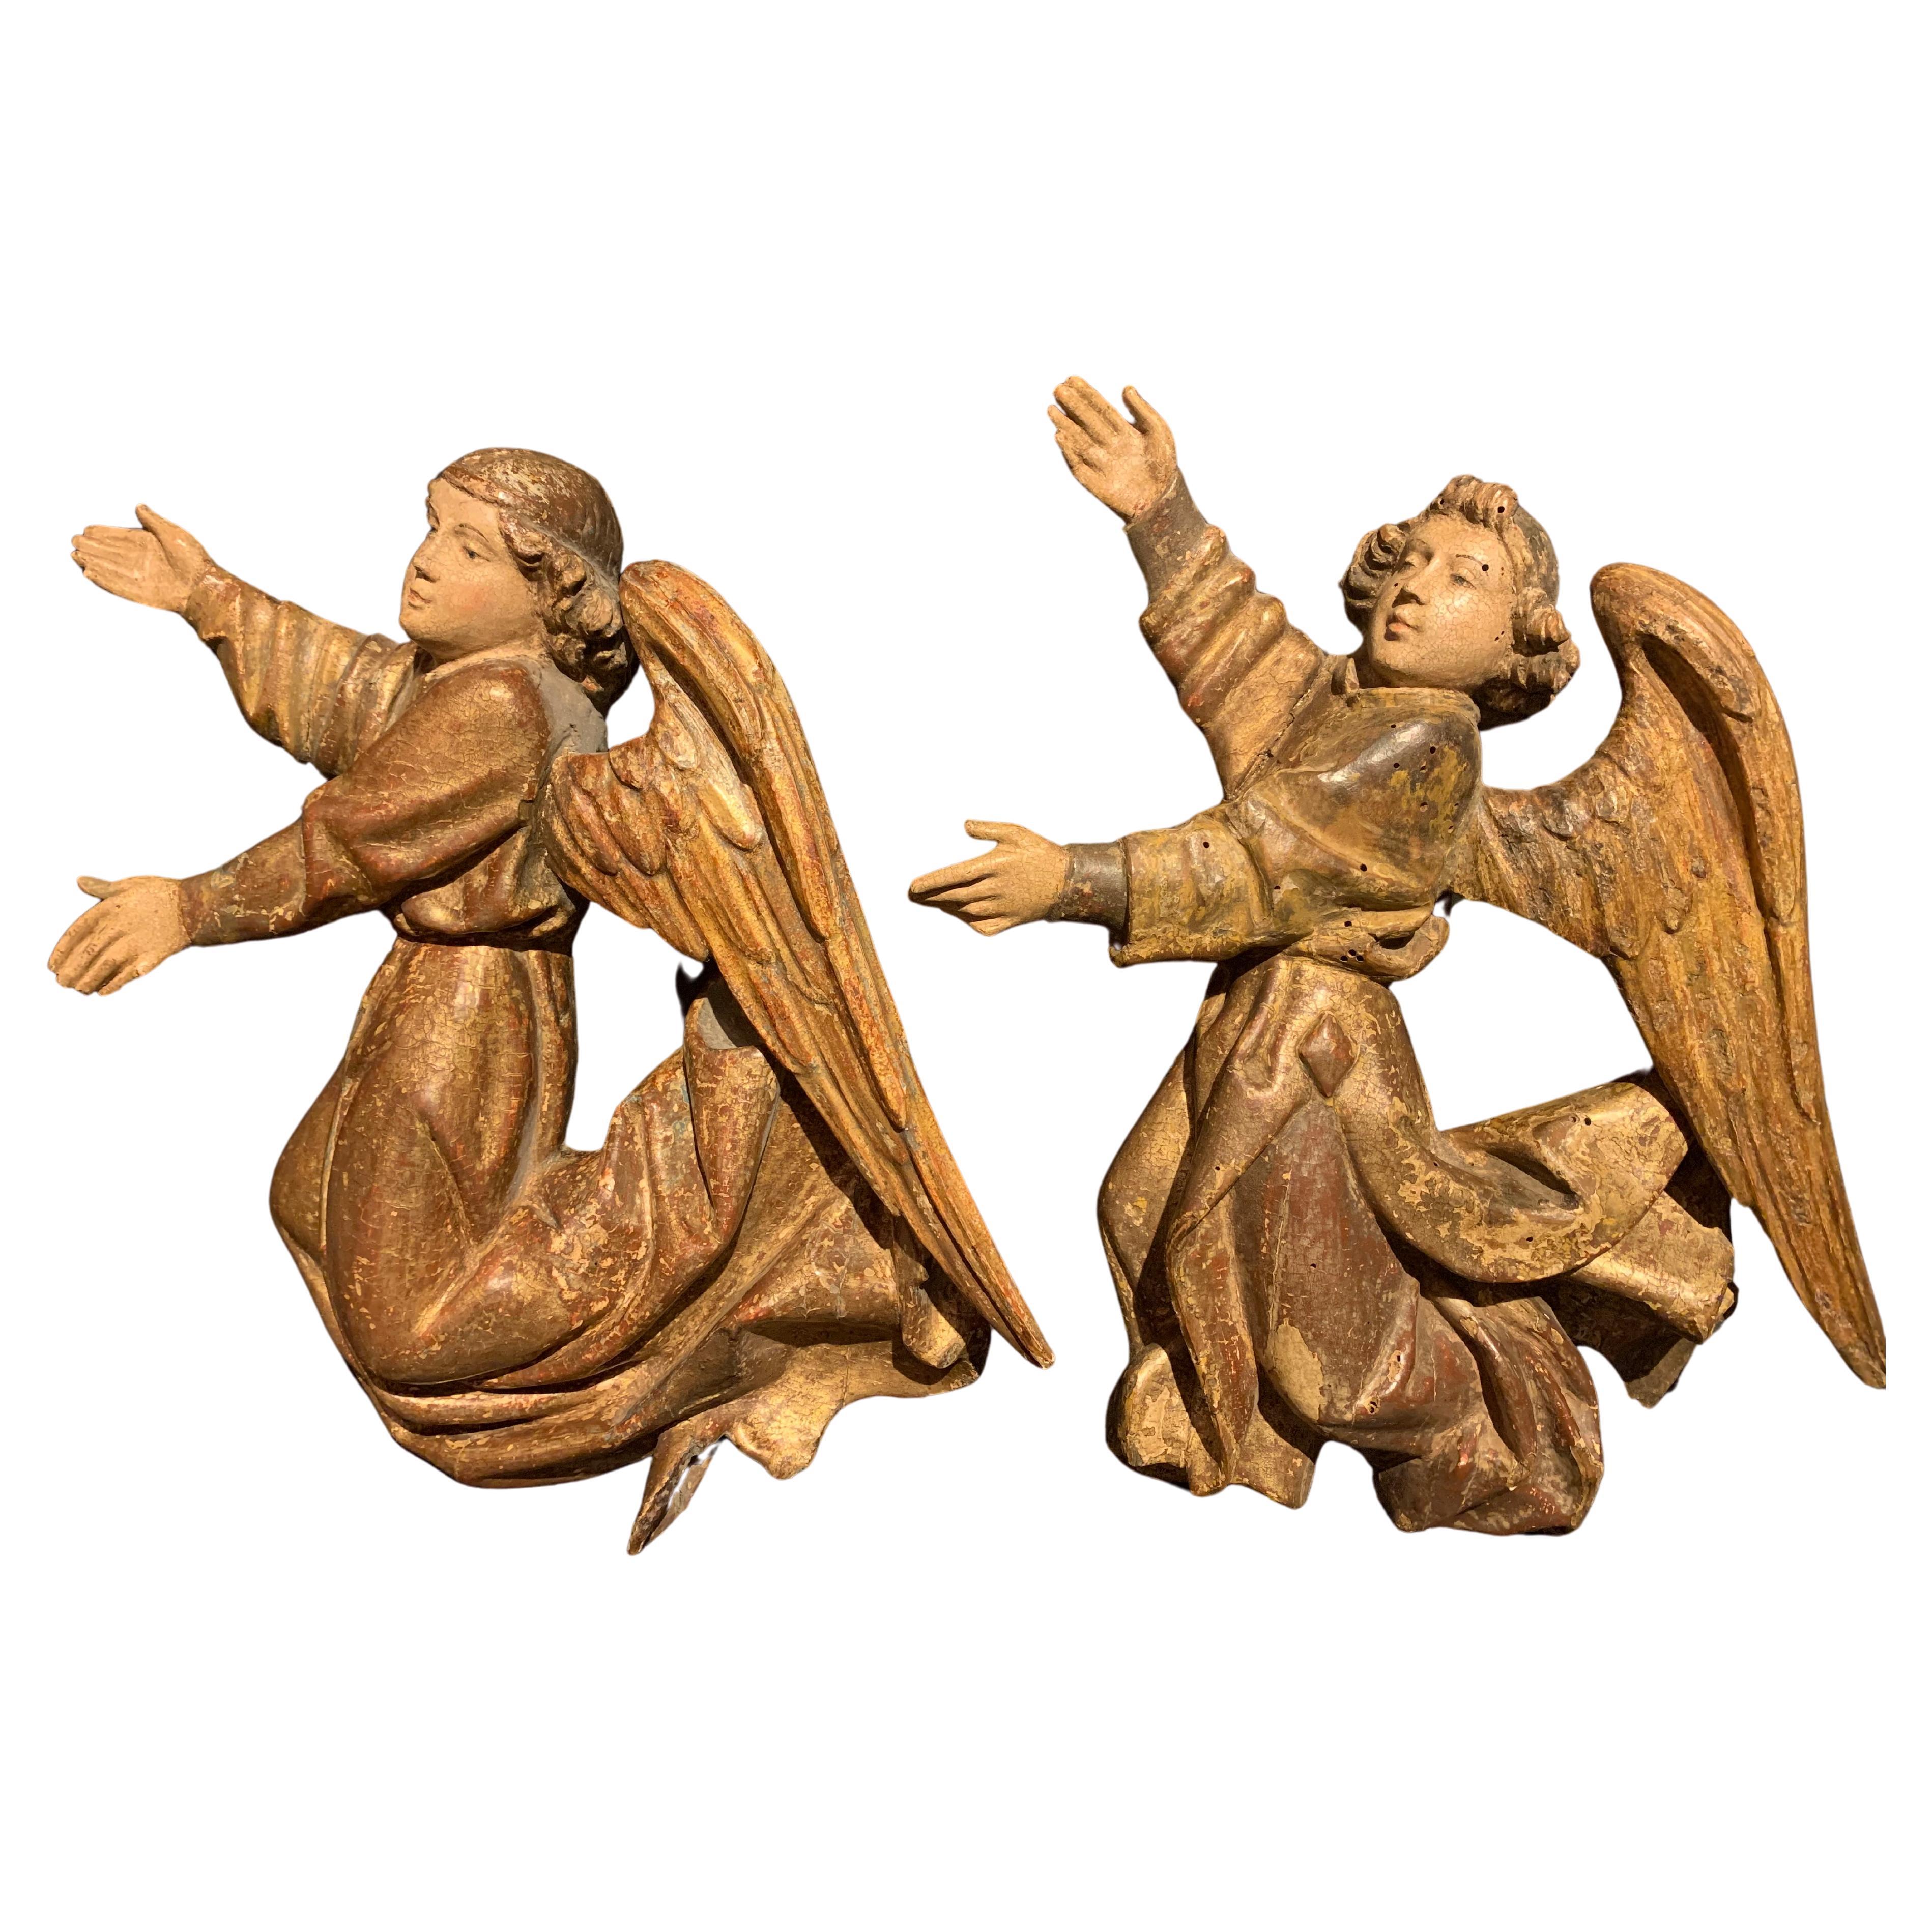 Two  Sculpted Wooden Angels , Flanders, Early 16th century.